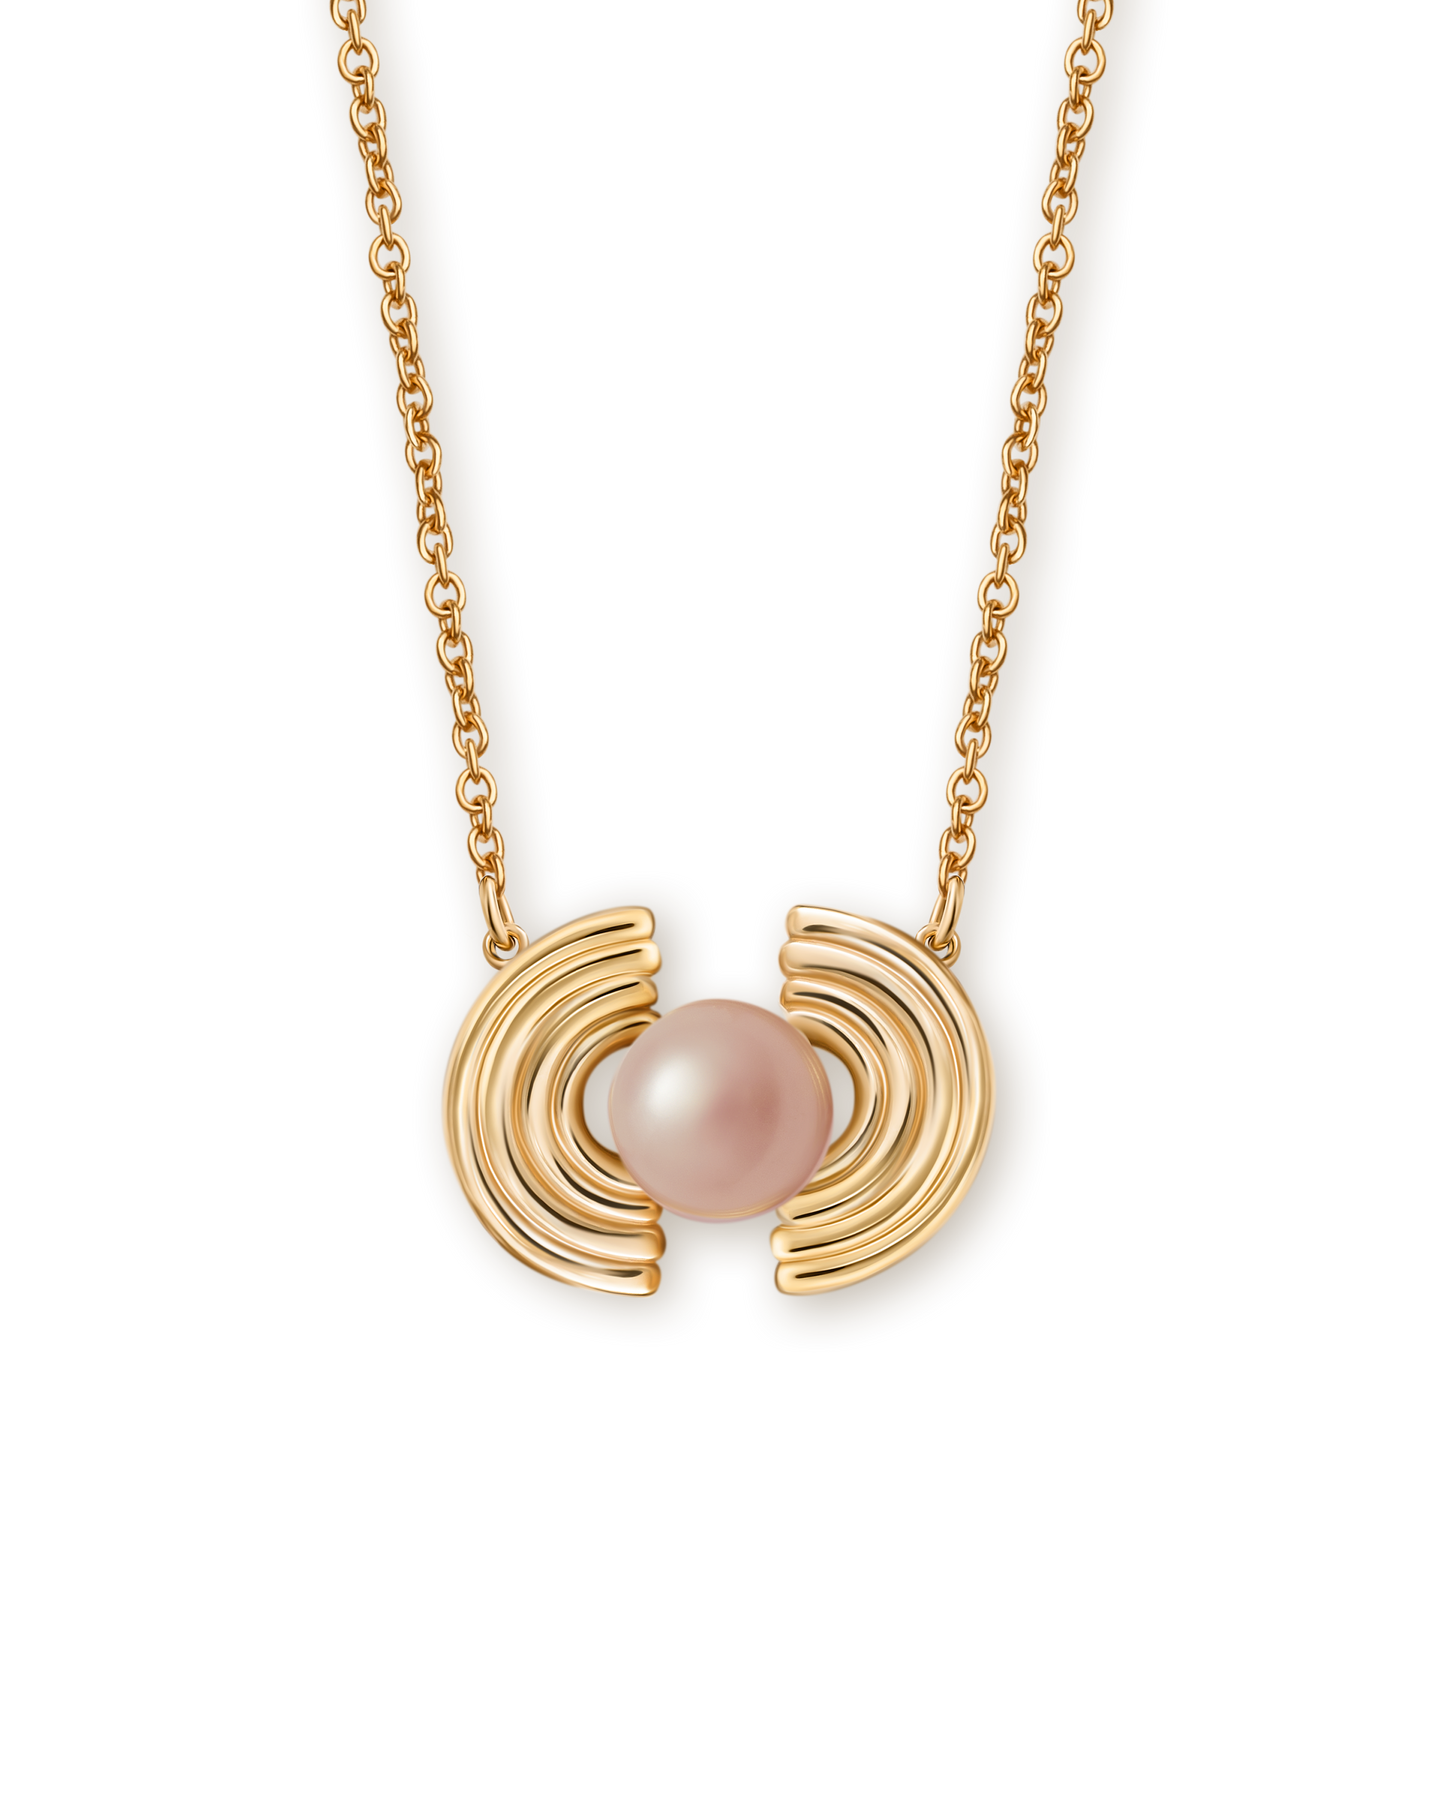 Beam and Gold Pendant